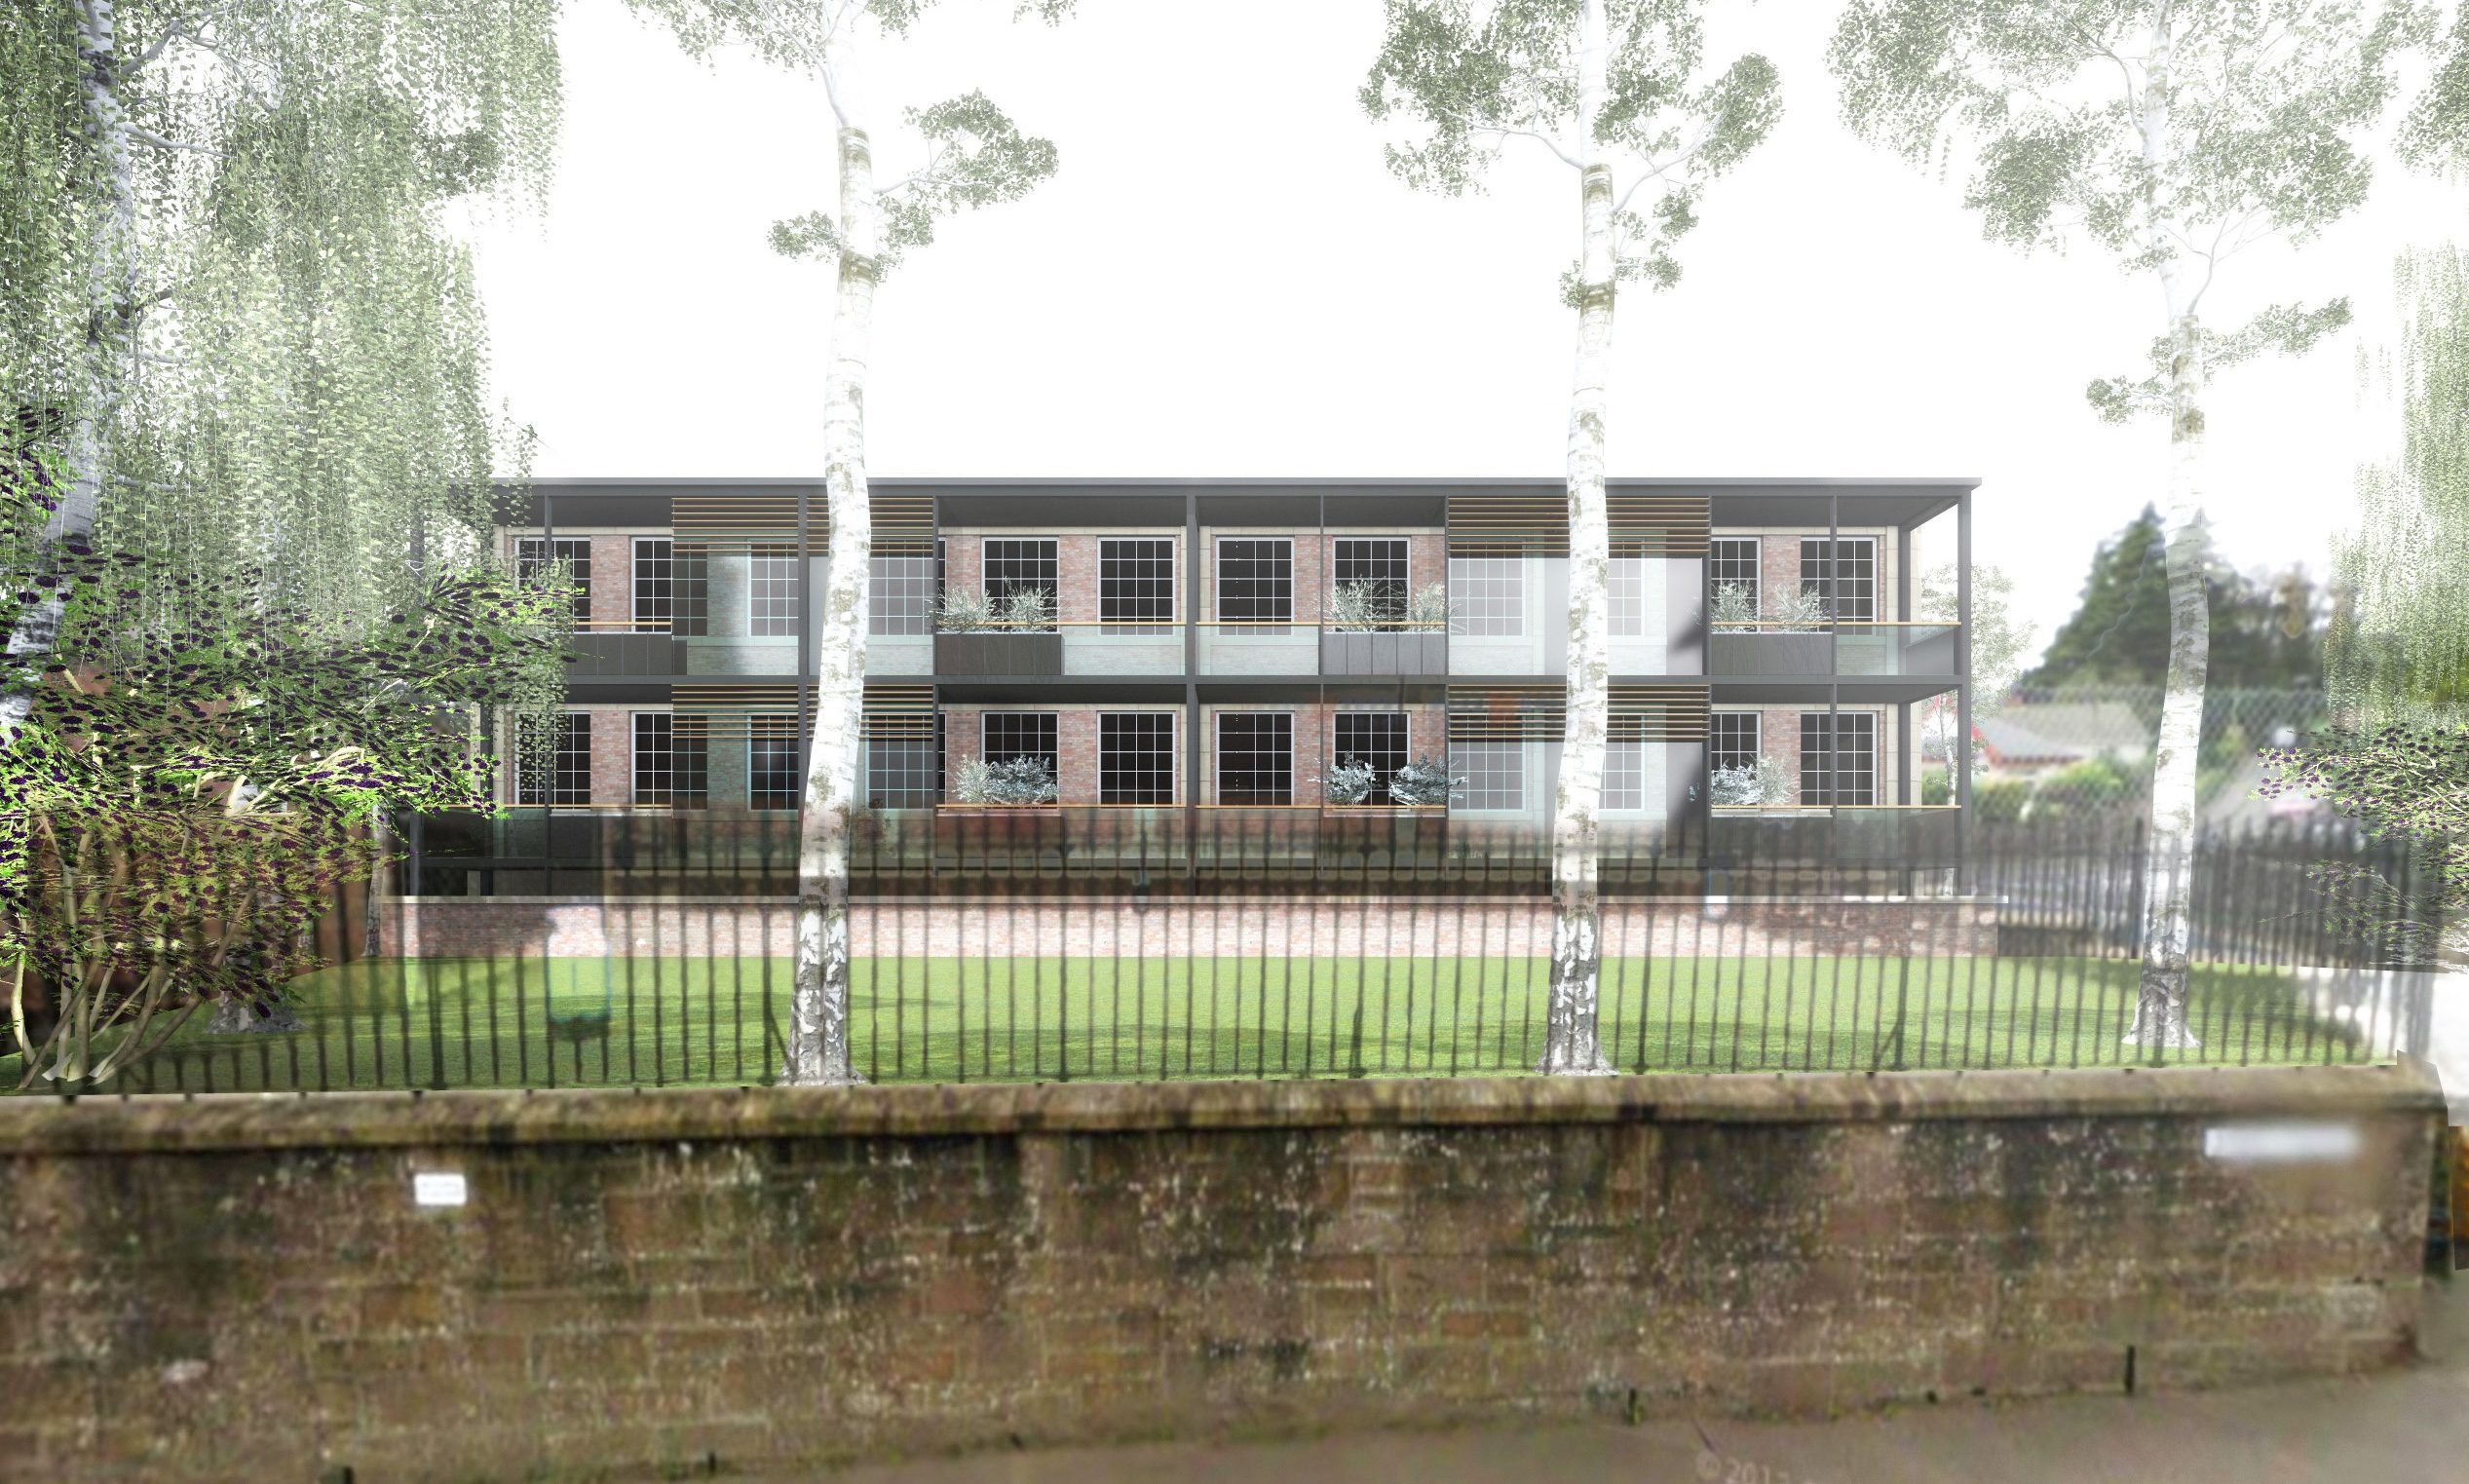 An artist's impression of Corryard's plan for old Hill Primary School in Blairgowrie.